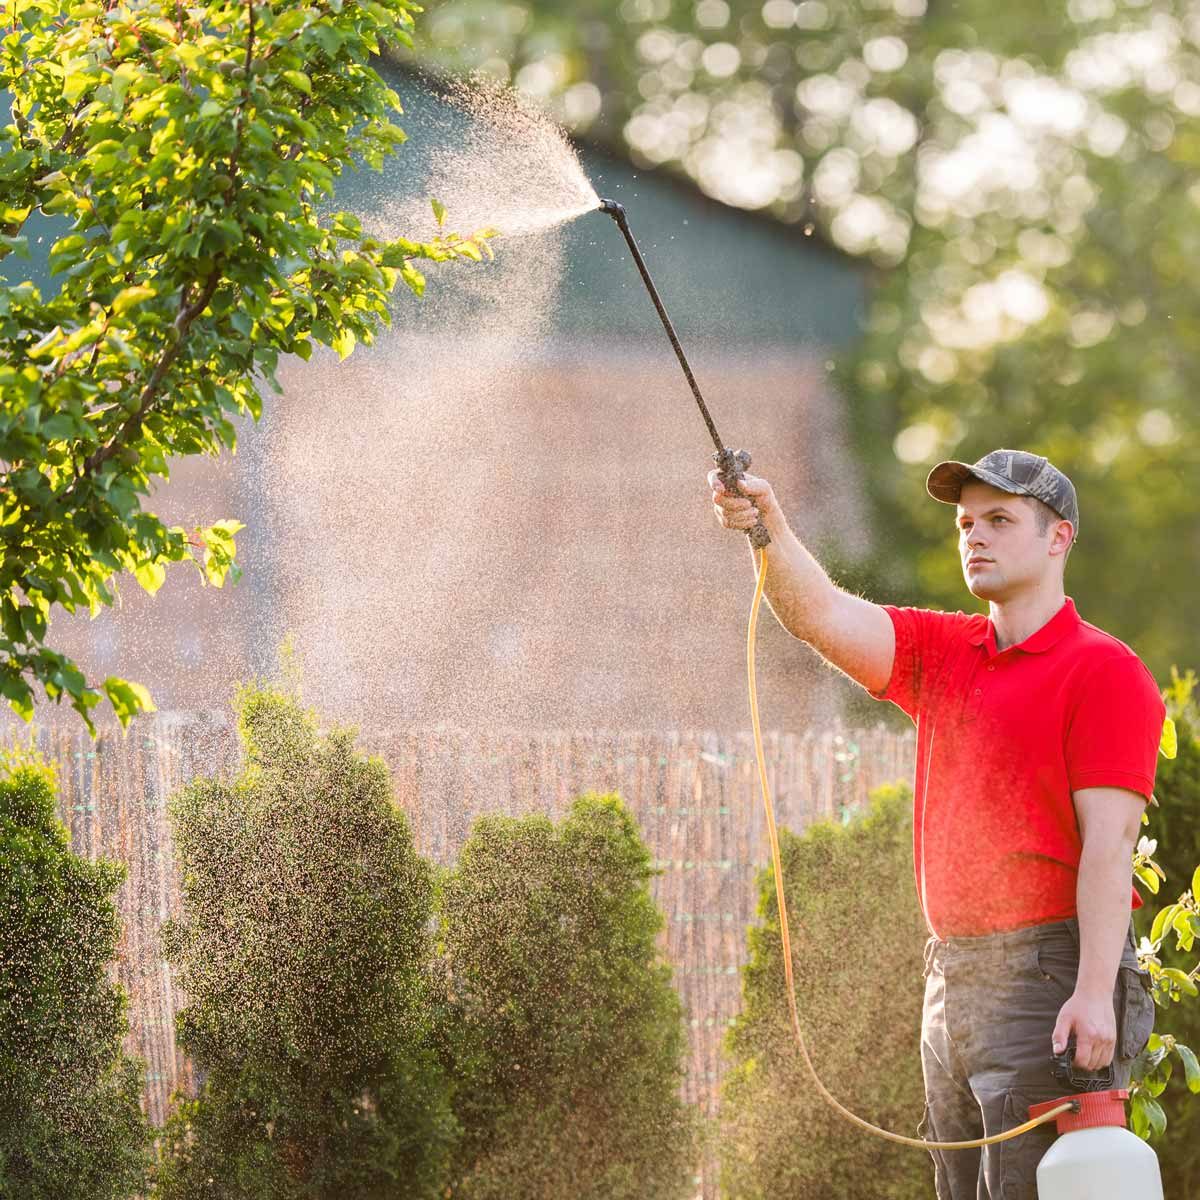 Gardener applying an insecticide fertilizer to his fruit shrubs, using a sprayer